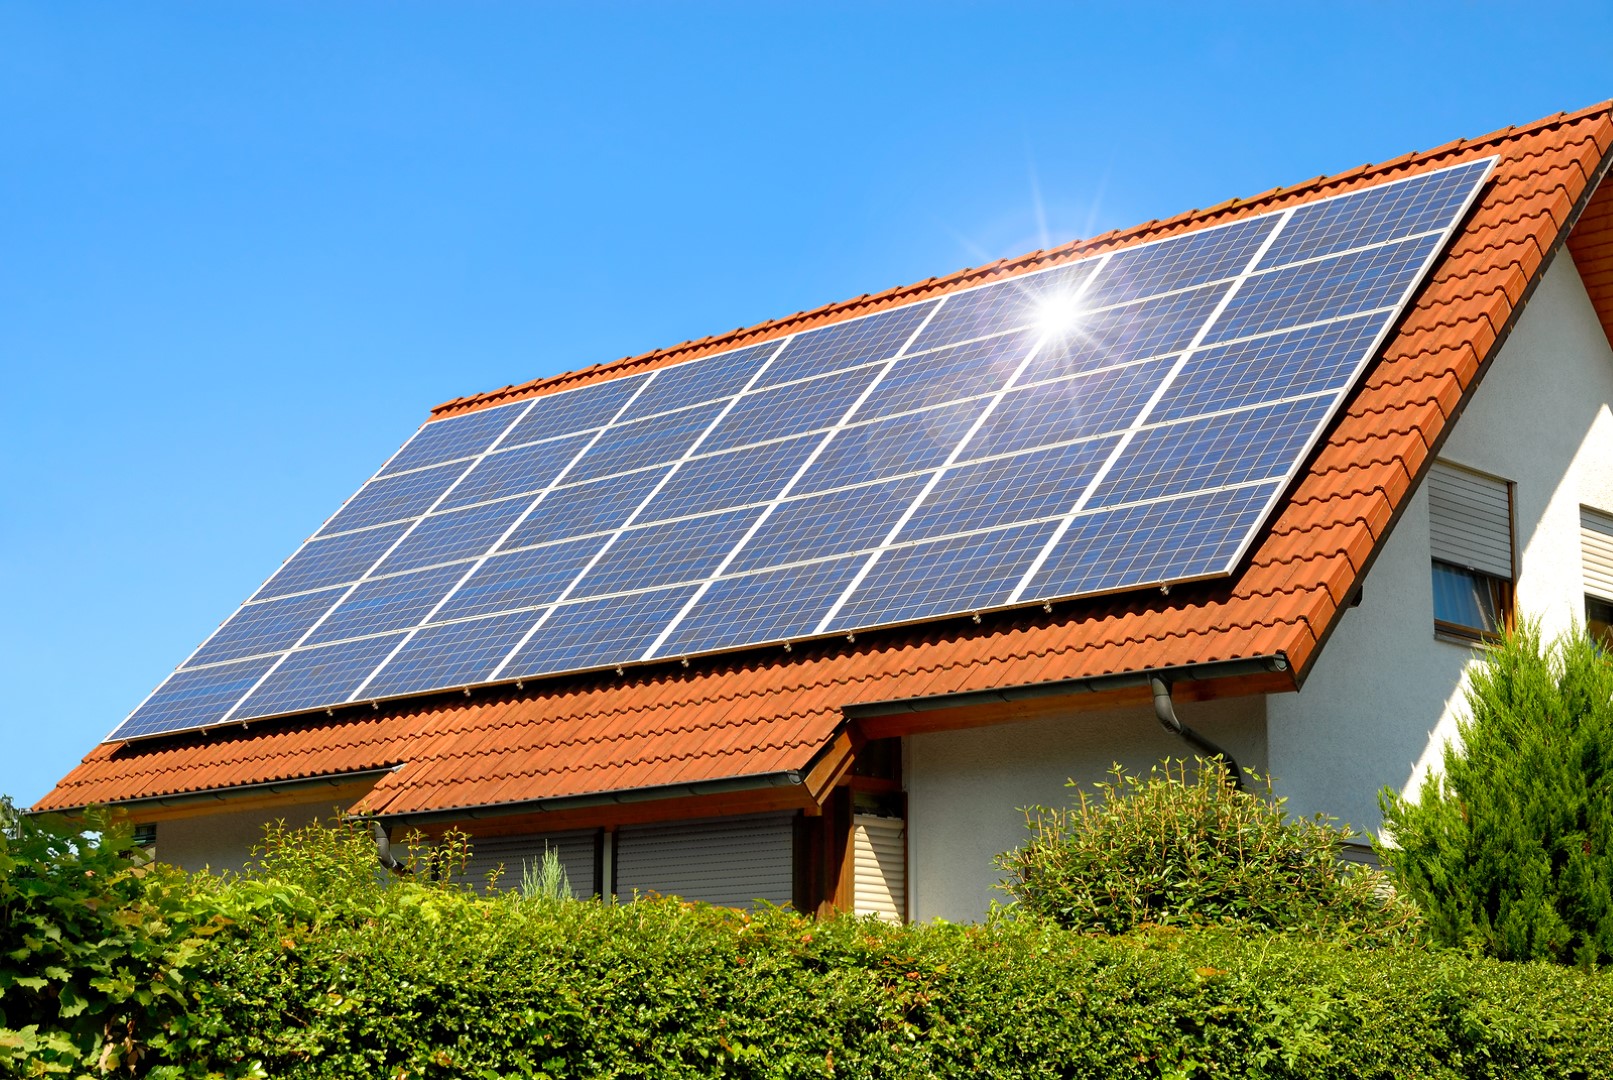  Property Assessed Financing For Solar Panels Reveal Serious Problems 